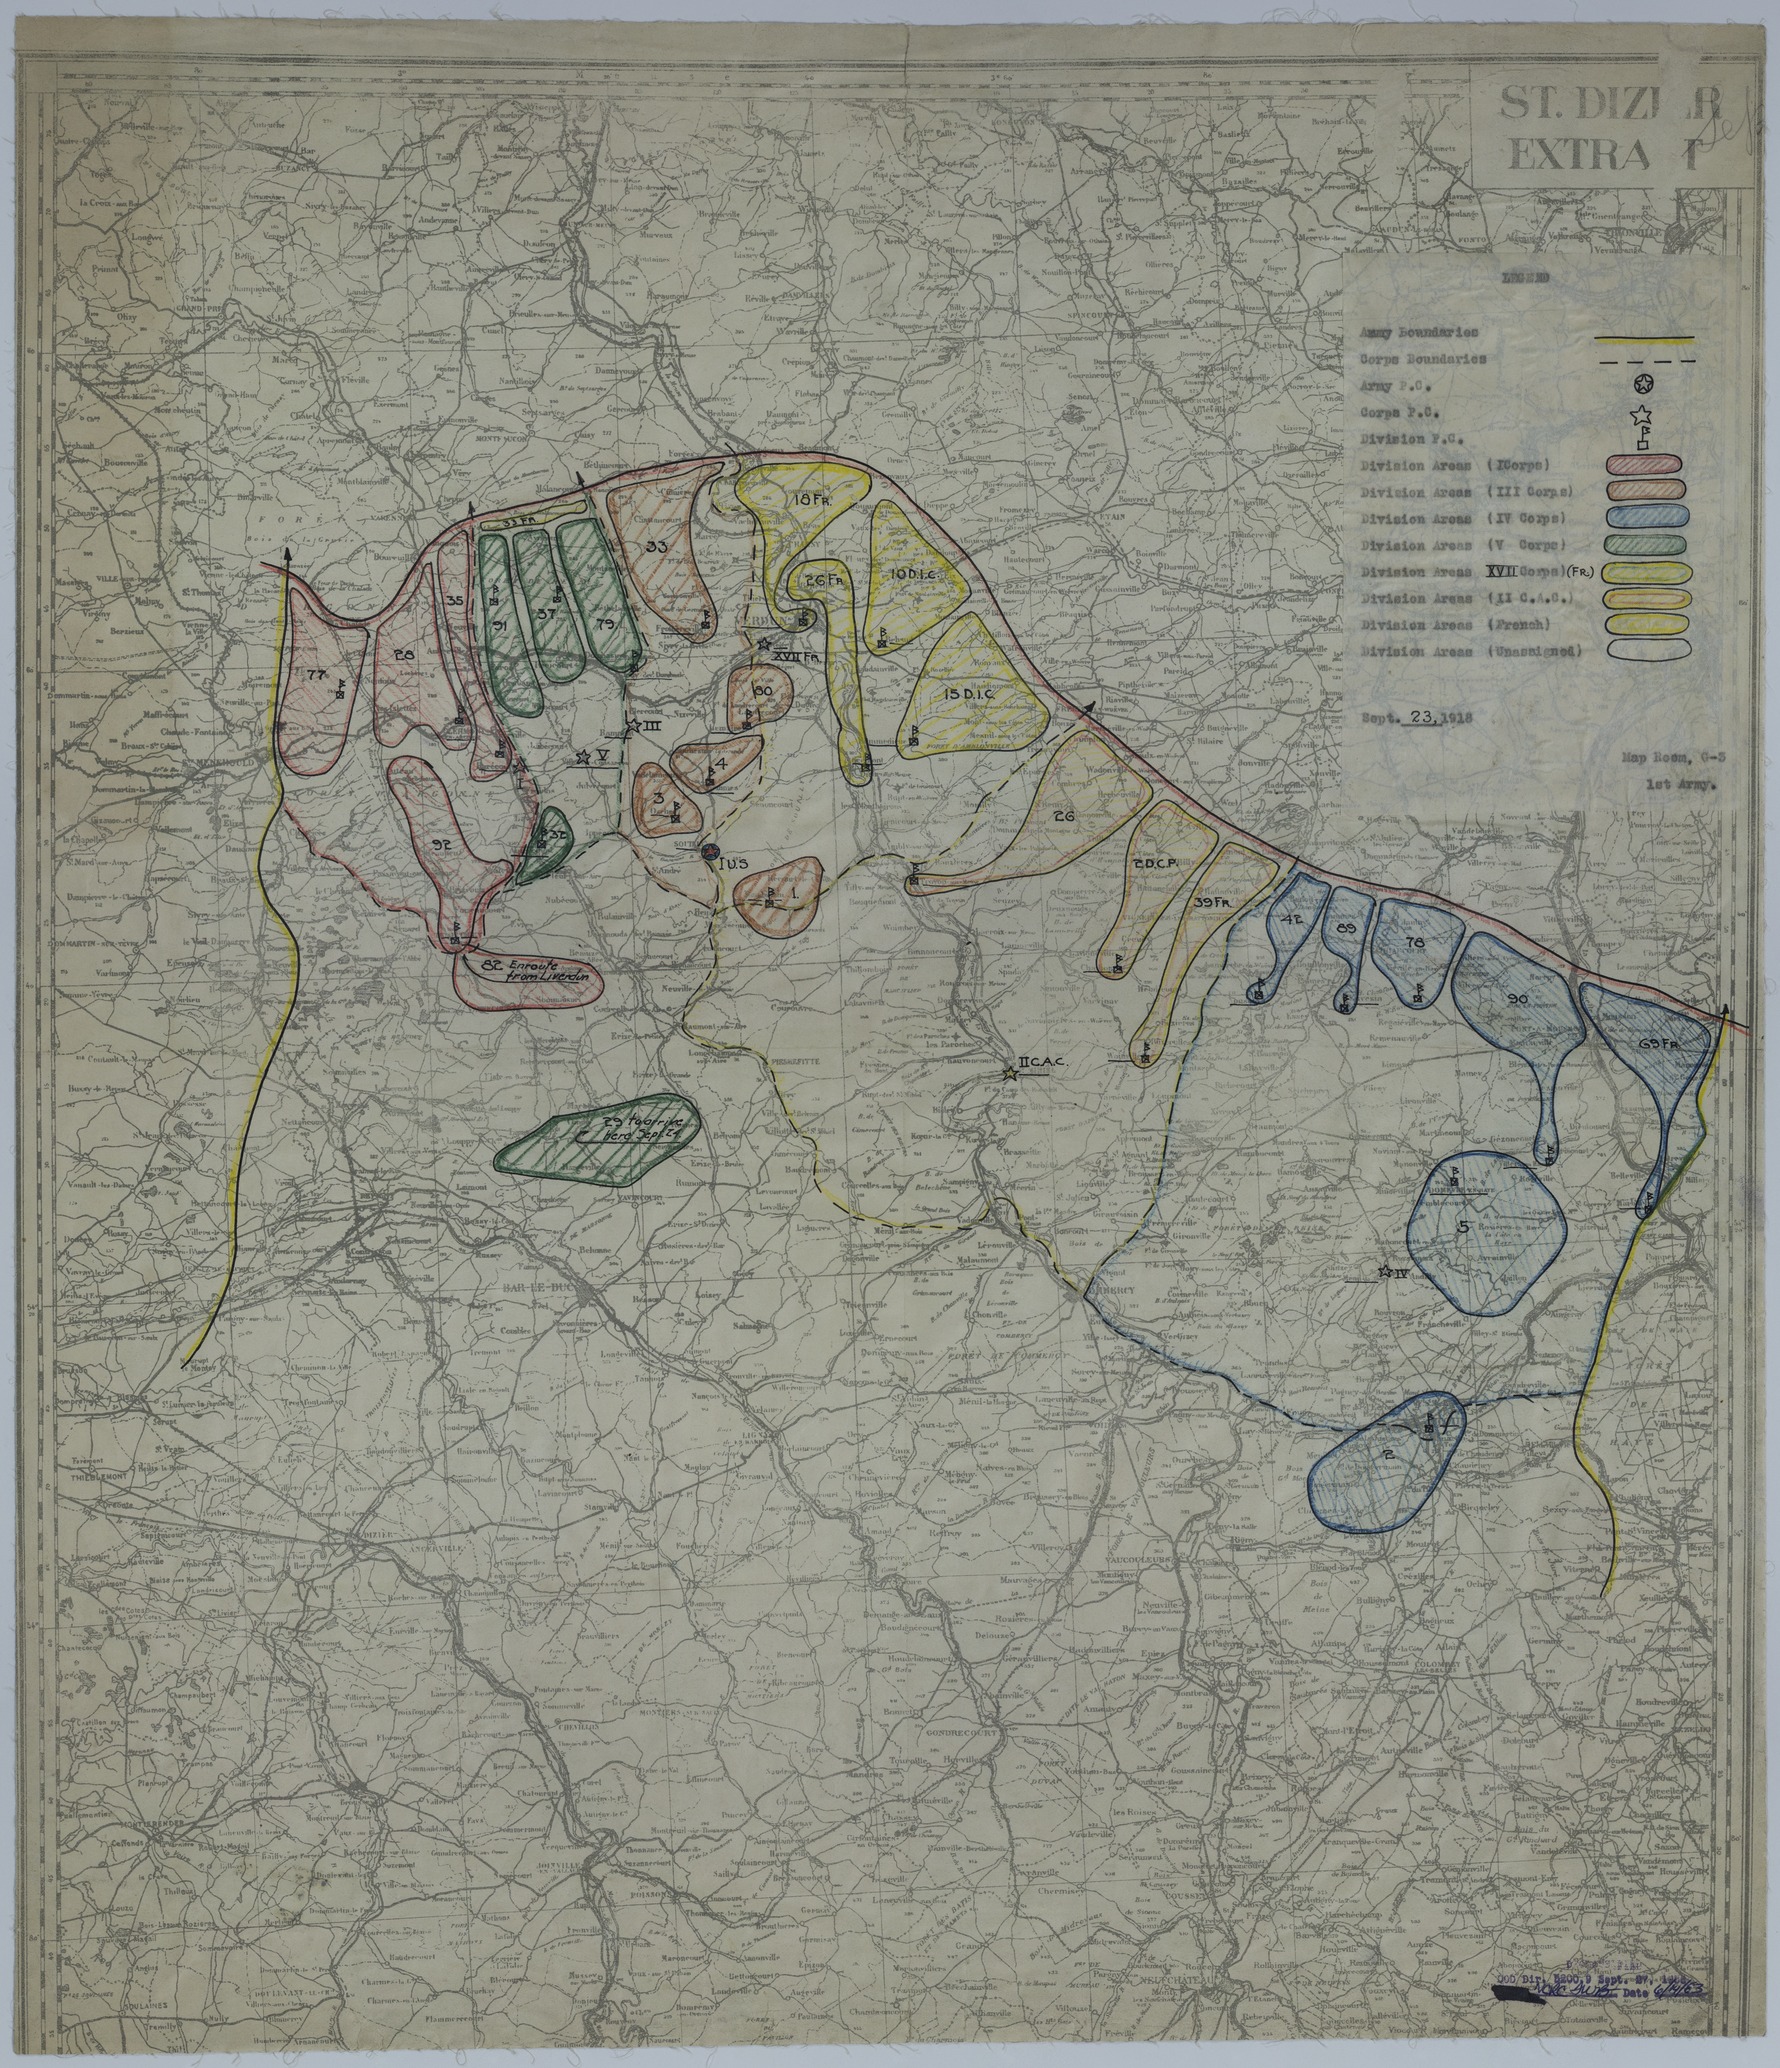 Map of Divisional Positions on September 23, 1918